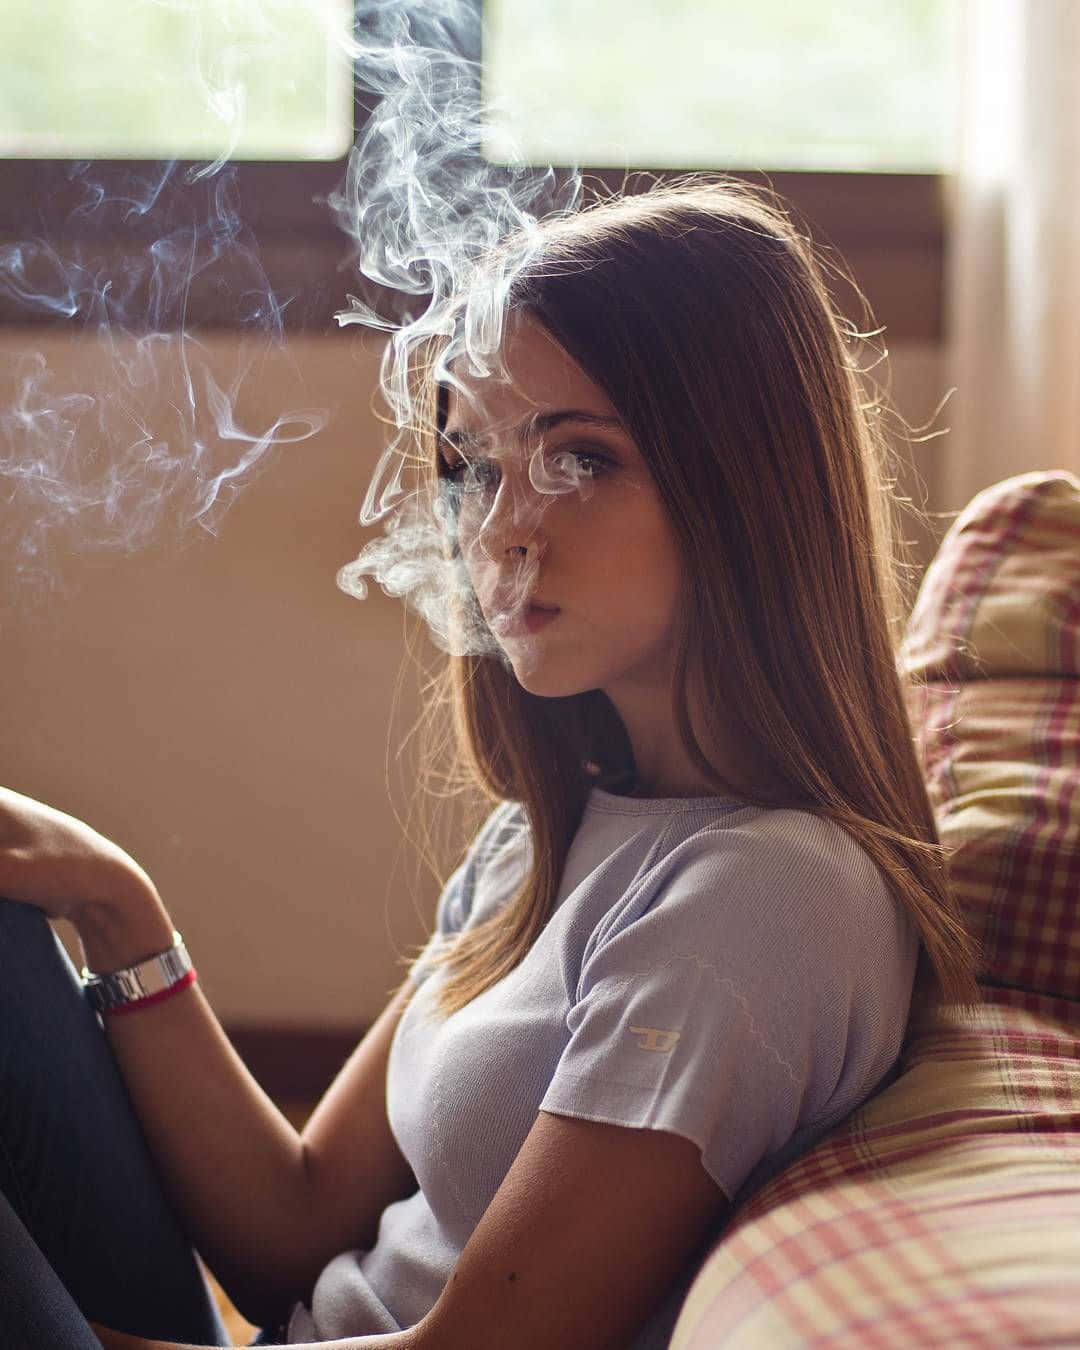 A Girl Sitting On A Couch Smoking A Cigarette